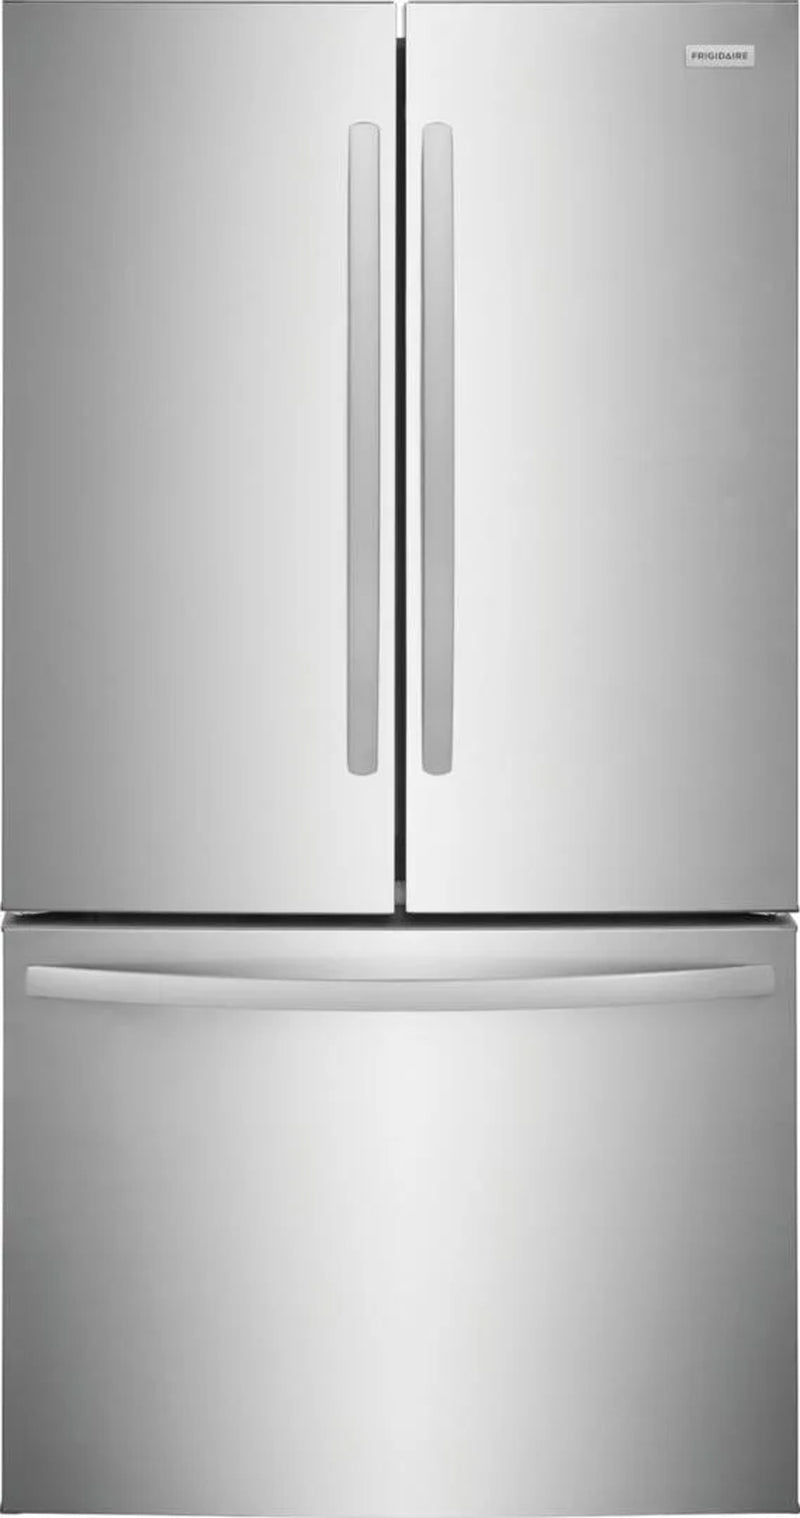 28.8 Cubic Feet French Door Refrigerator with Freezer, 70"